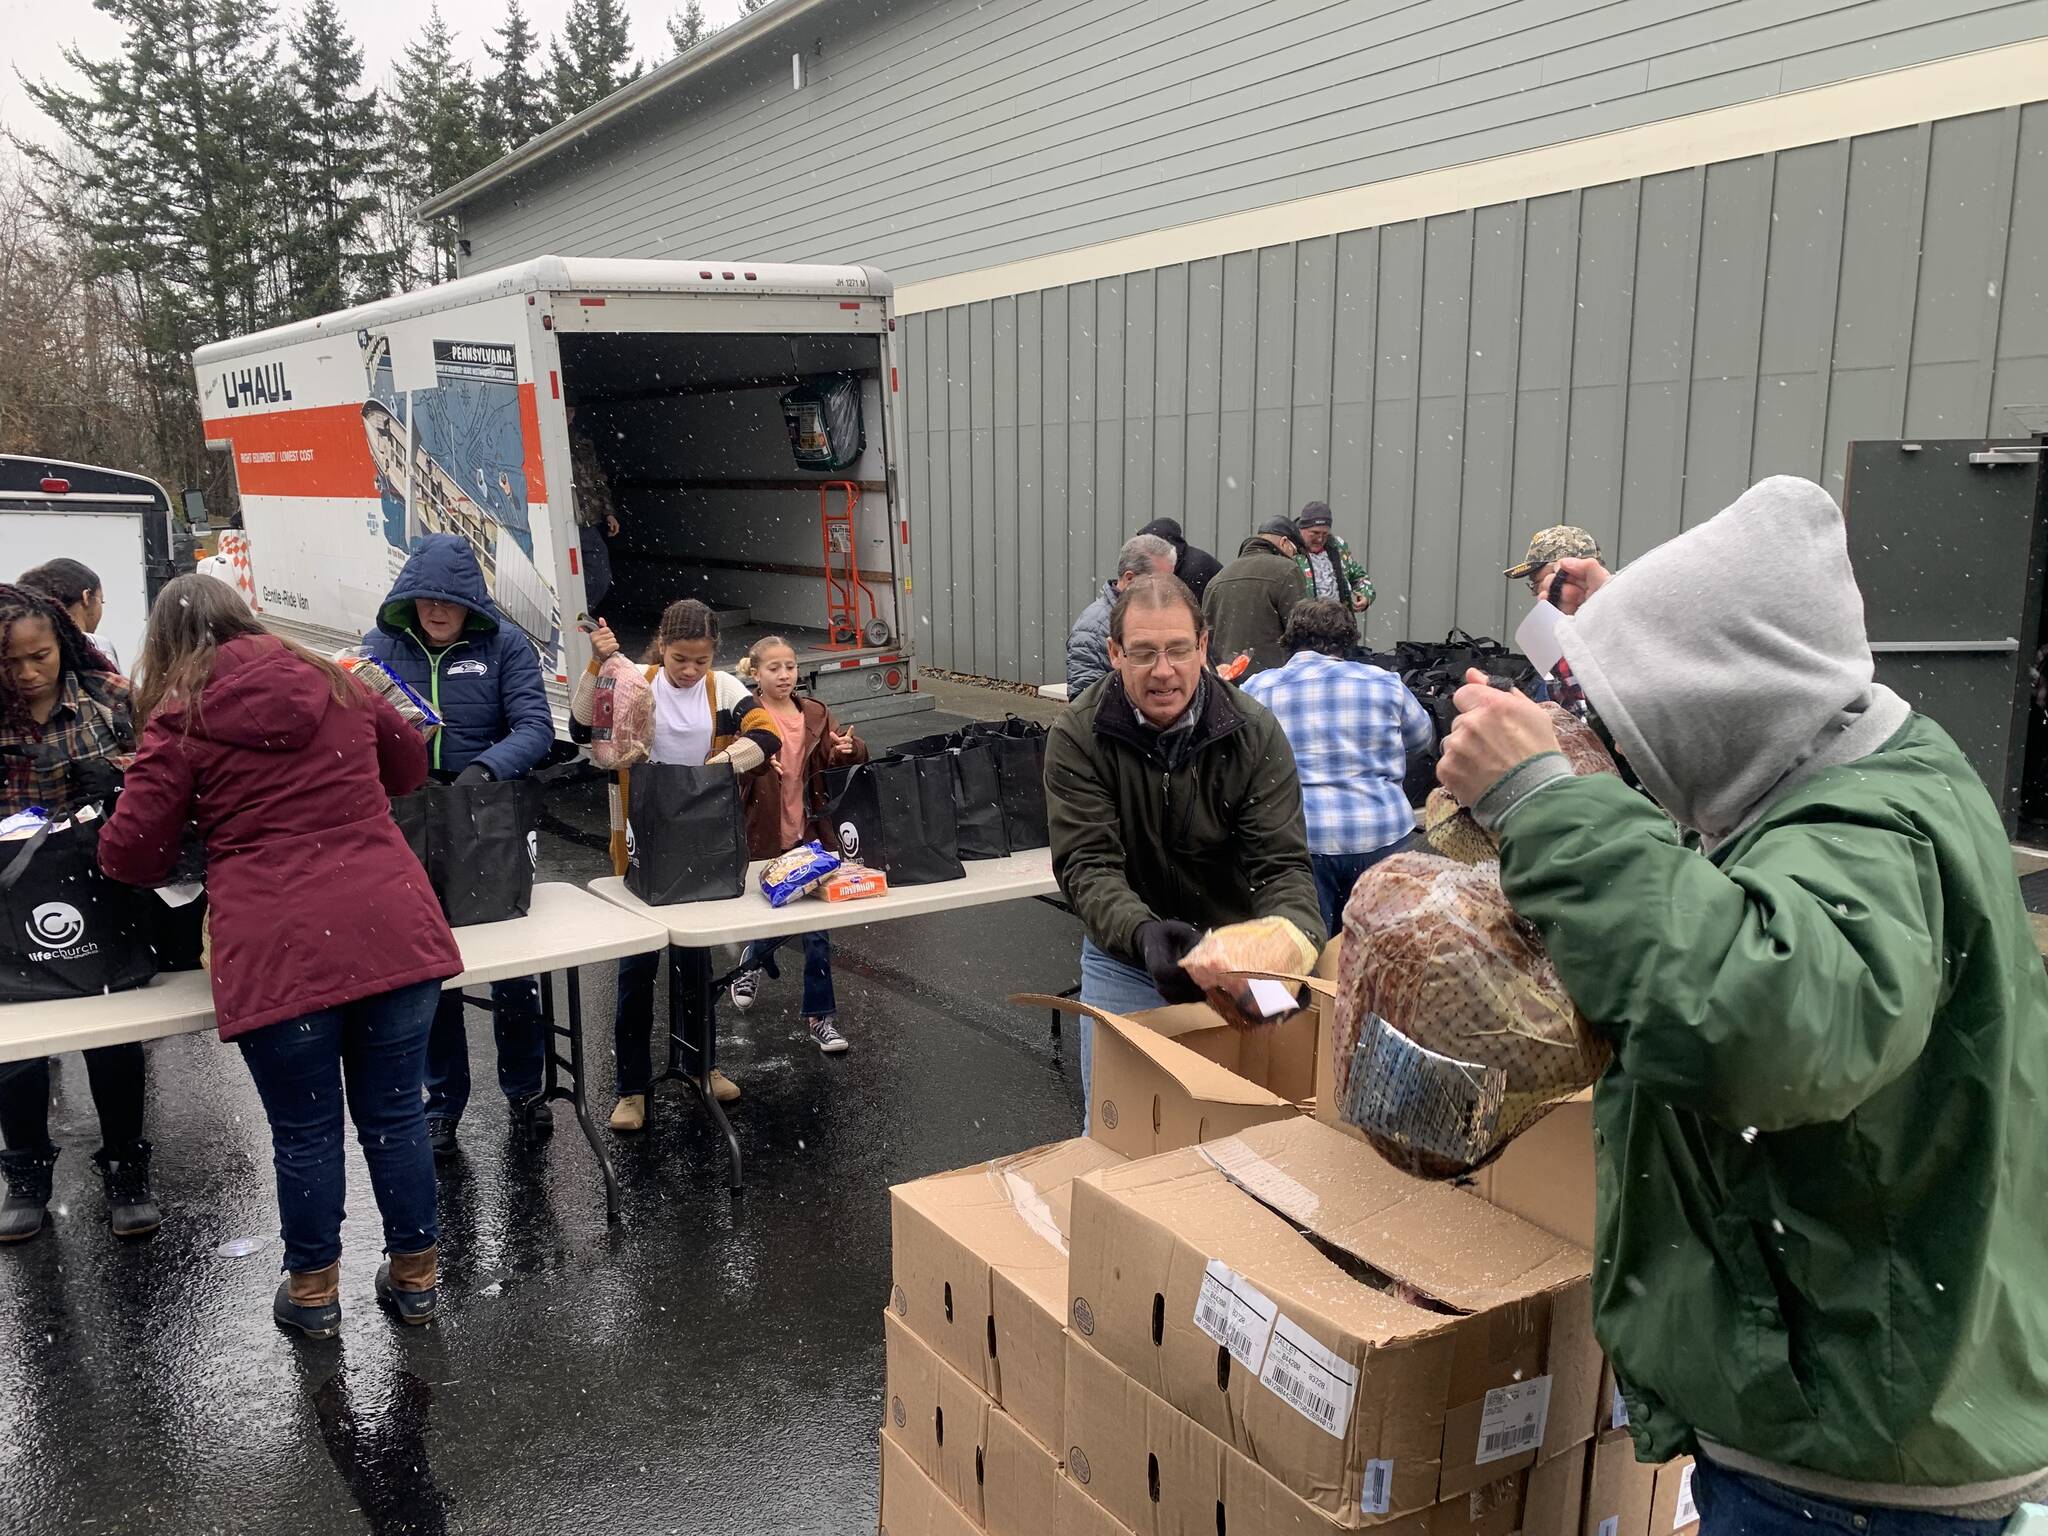 Life Church volunteers brave the cold last weekend to distribute Christmas meals to families in need. (Photo provided)